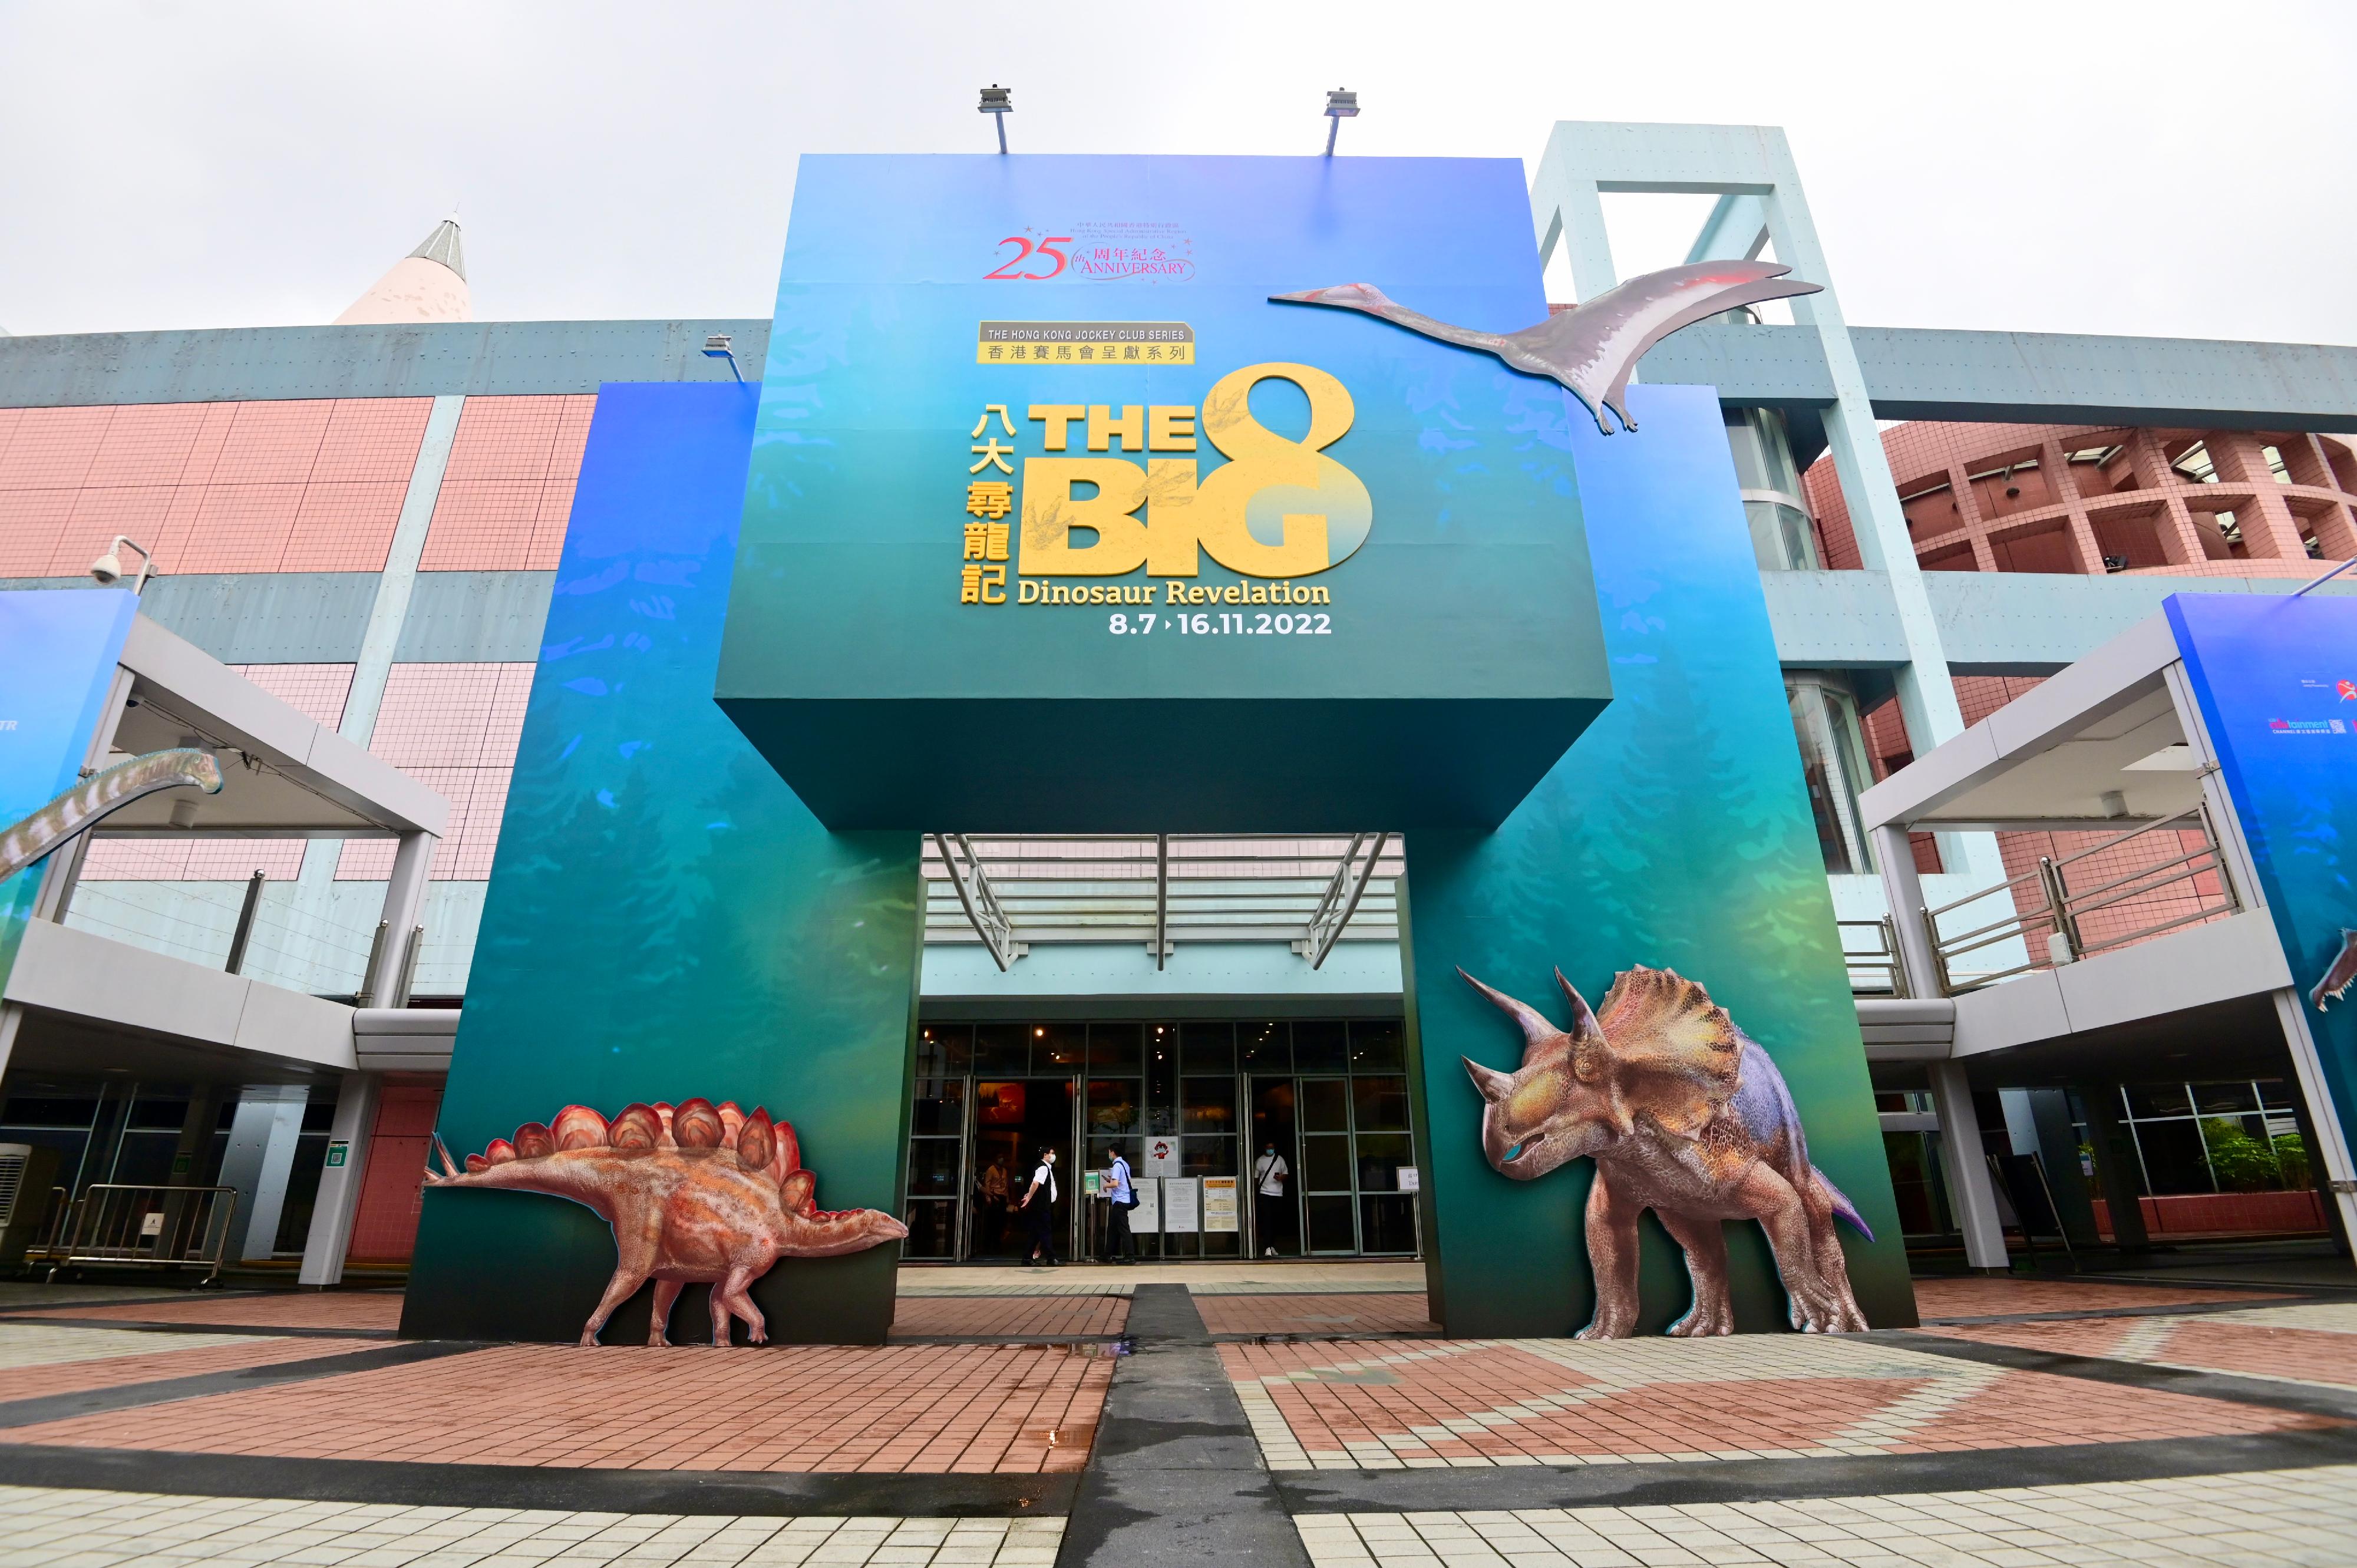 The Hong Kong Science Museum will stage a large-scale dinosaur exhibition, "The Hong Kong Jockey Club Series: The Big Eight - Dinosaur Revelation", from July 8 (Friday). Picture shows the museum's entrance decorated with dinosaurs.